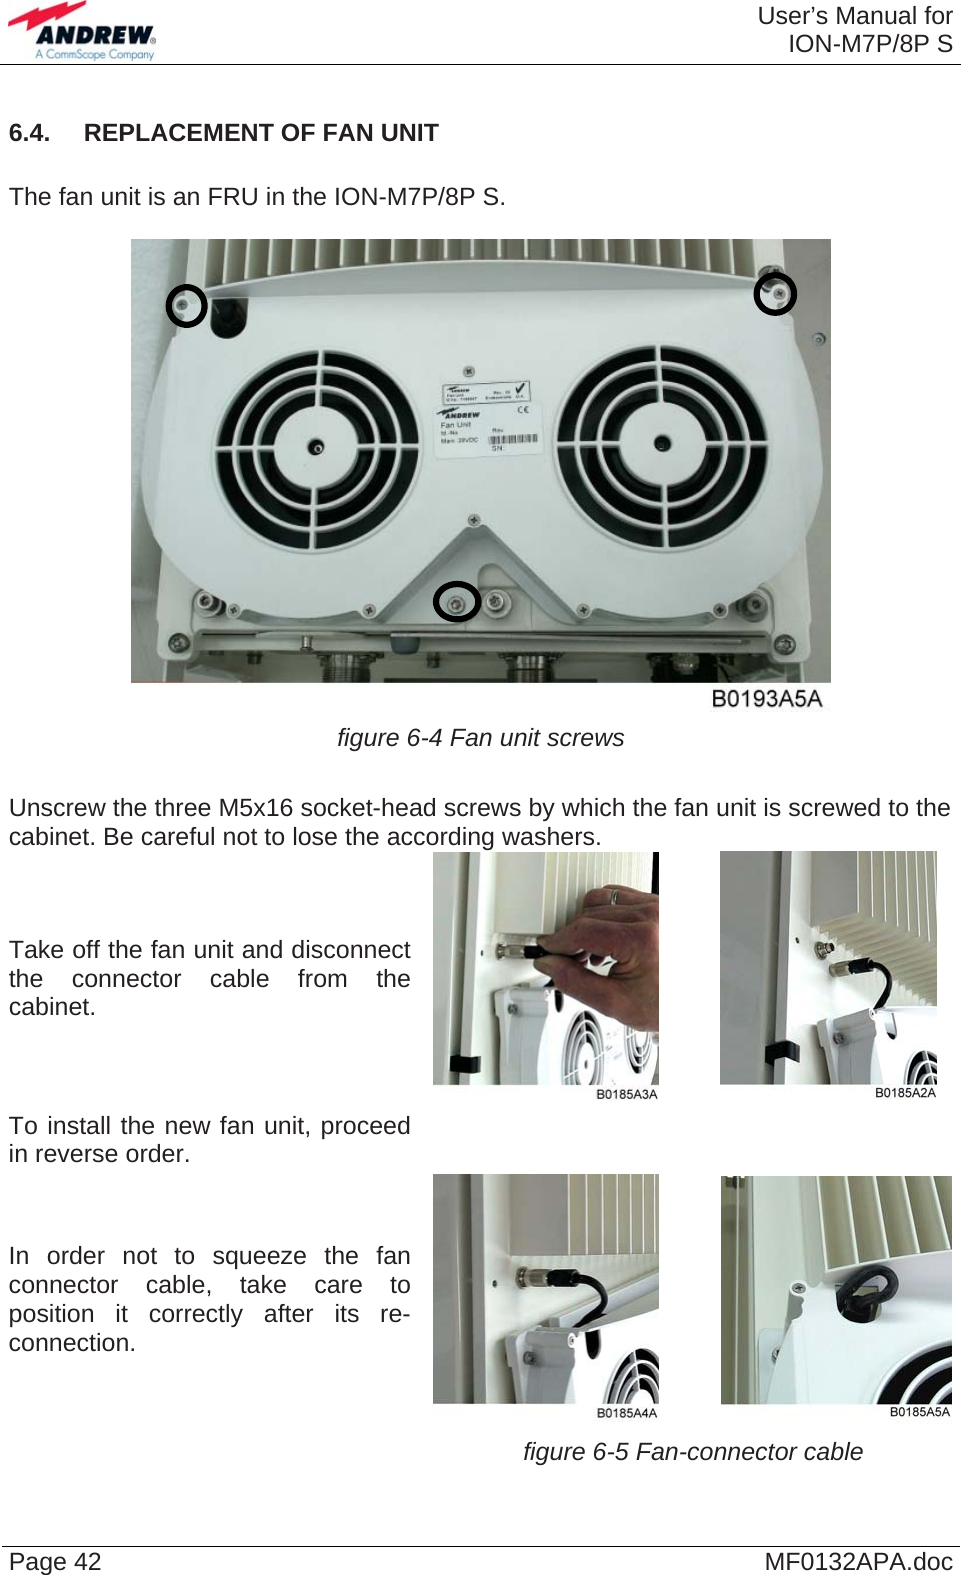  User’s Manual forION-M7P/8P S Page 42  MF0132APA.doc6.4.  REPLACEMENT OF FAN UNIT  The fan unit is an FRU in the ION-M7P/8P S.   figure 6-4 Fan unit screws  Unscrew the three M5x16 socket-head screws by which the fan unit is screwed to the cabinet. Be careful not to lose the according washers. Take off the fan unit and disconnect the connector cable from the cabinet.            To install the new fan unit, proceed in reverse order.   In order not to squeeze the fan connector cable, take care to position it correctly after its re-connection.             figure 6-5 Fan-connector cable   